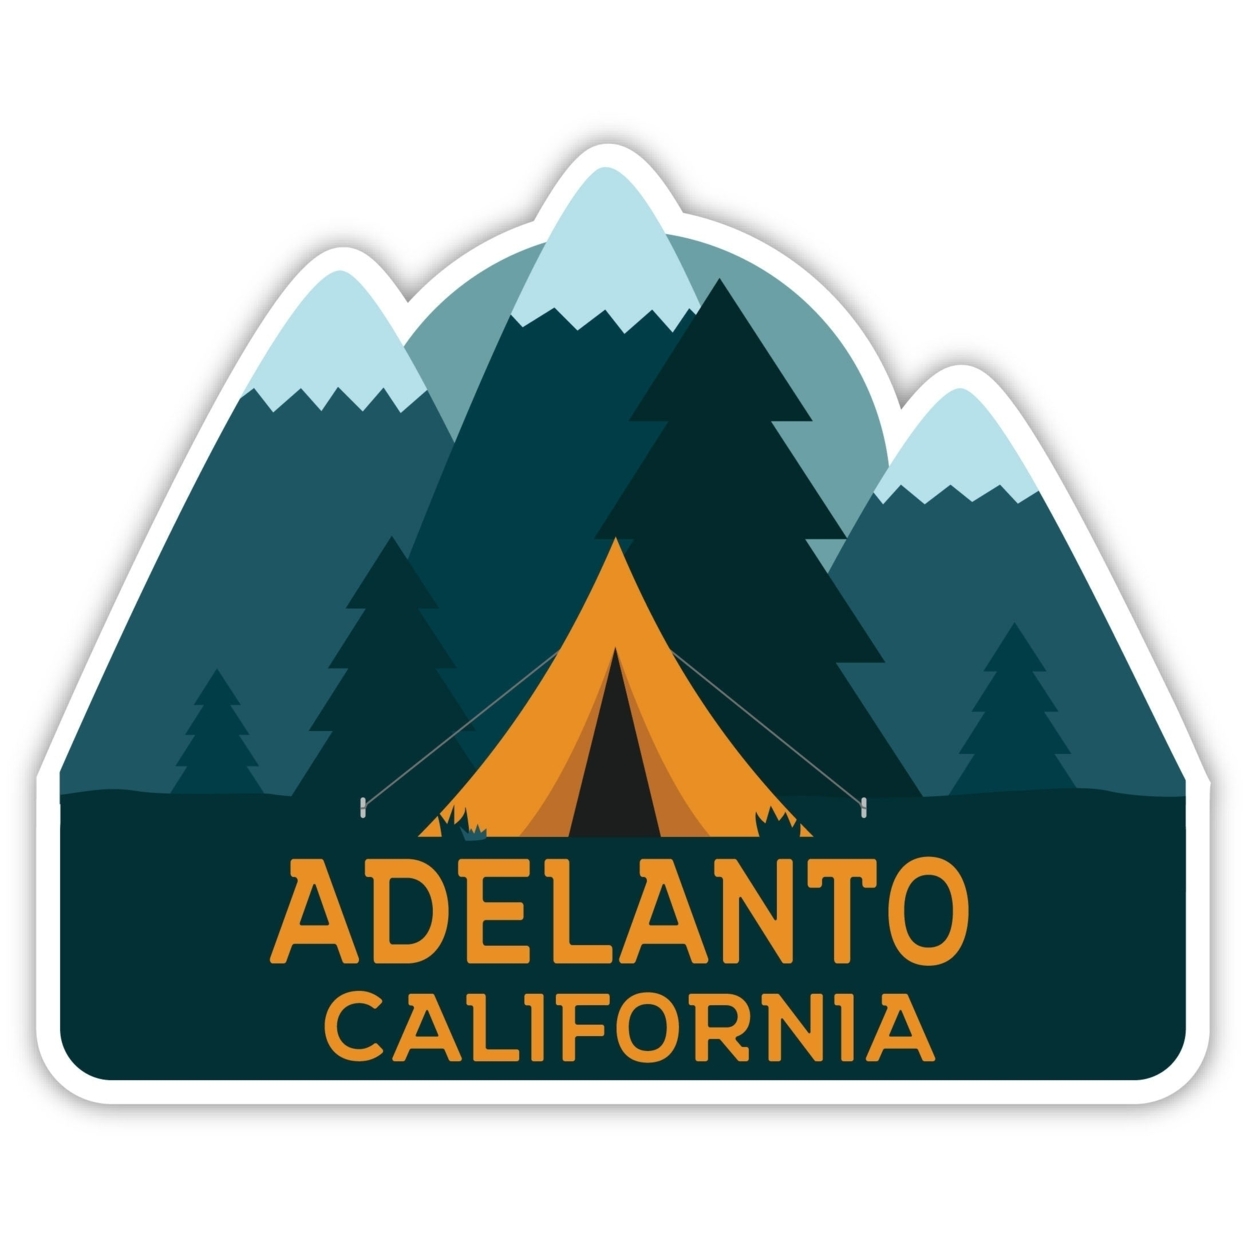 Adelanto California Souvenir Decorative Stickers (Choose Theme And Size) - 4-Pack, 10-Inch, Tent